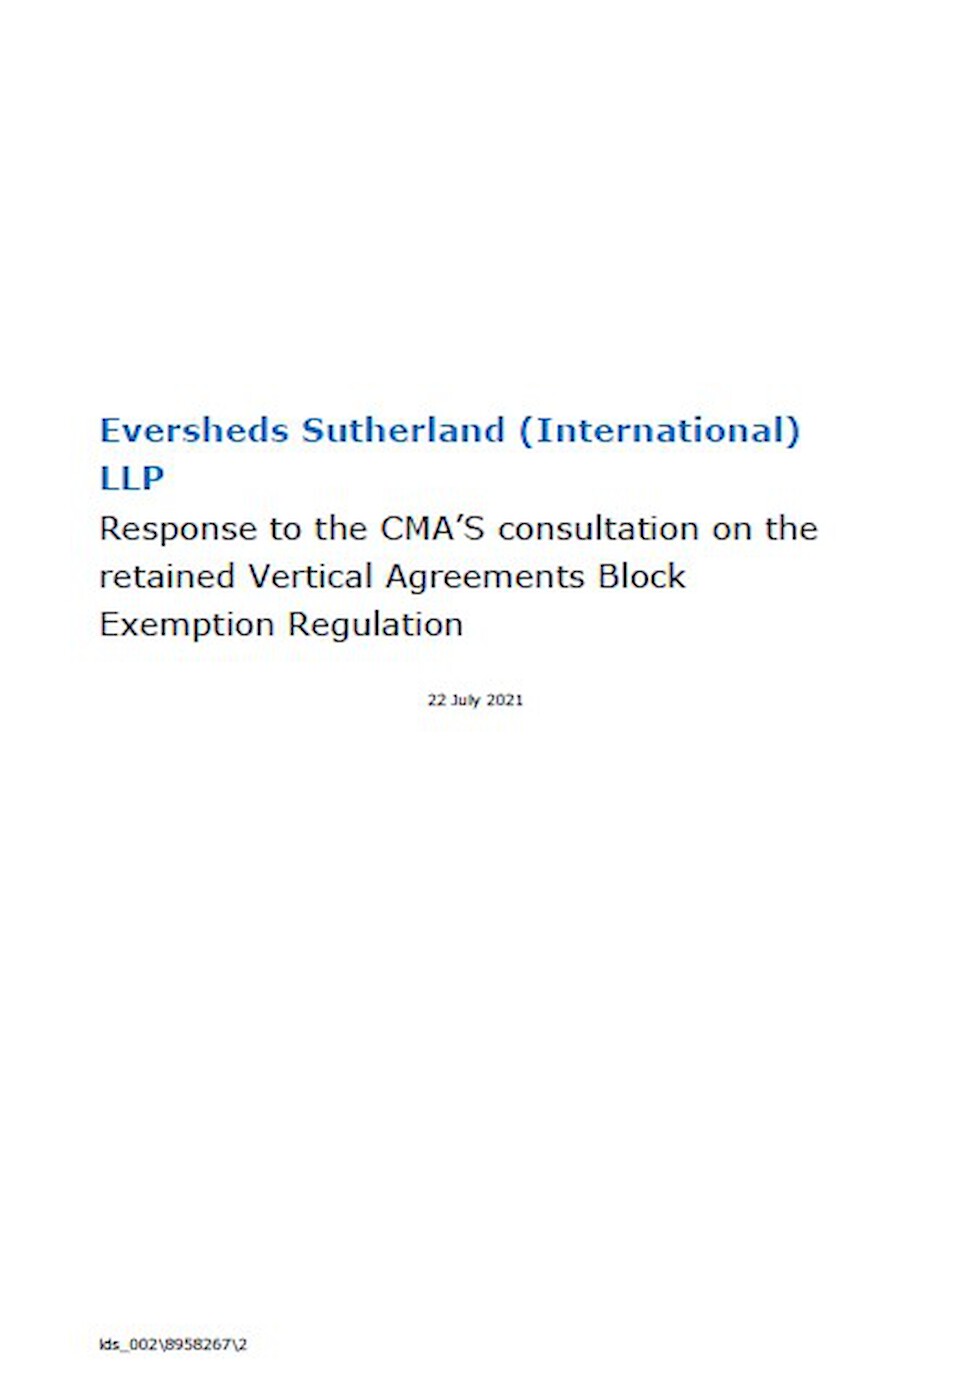 Response to the CMA’S consultation on the retained Vertical Agreements Block Exemption Regulation